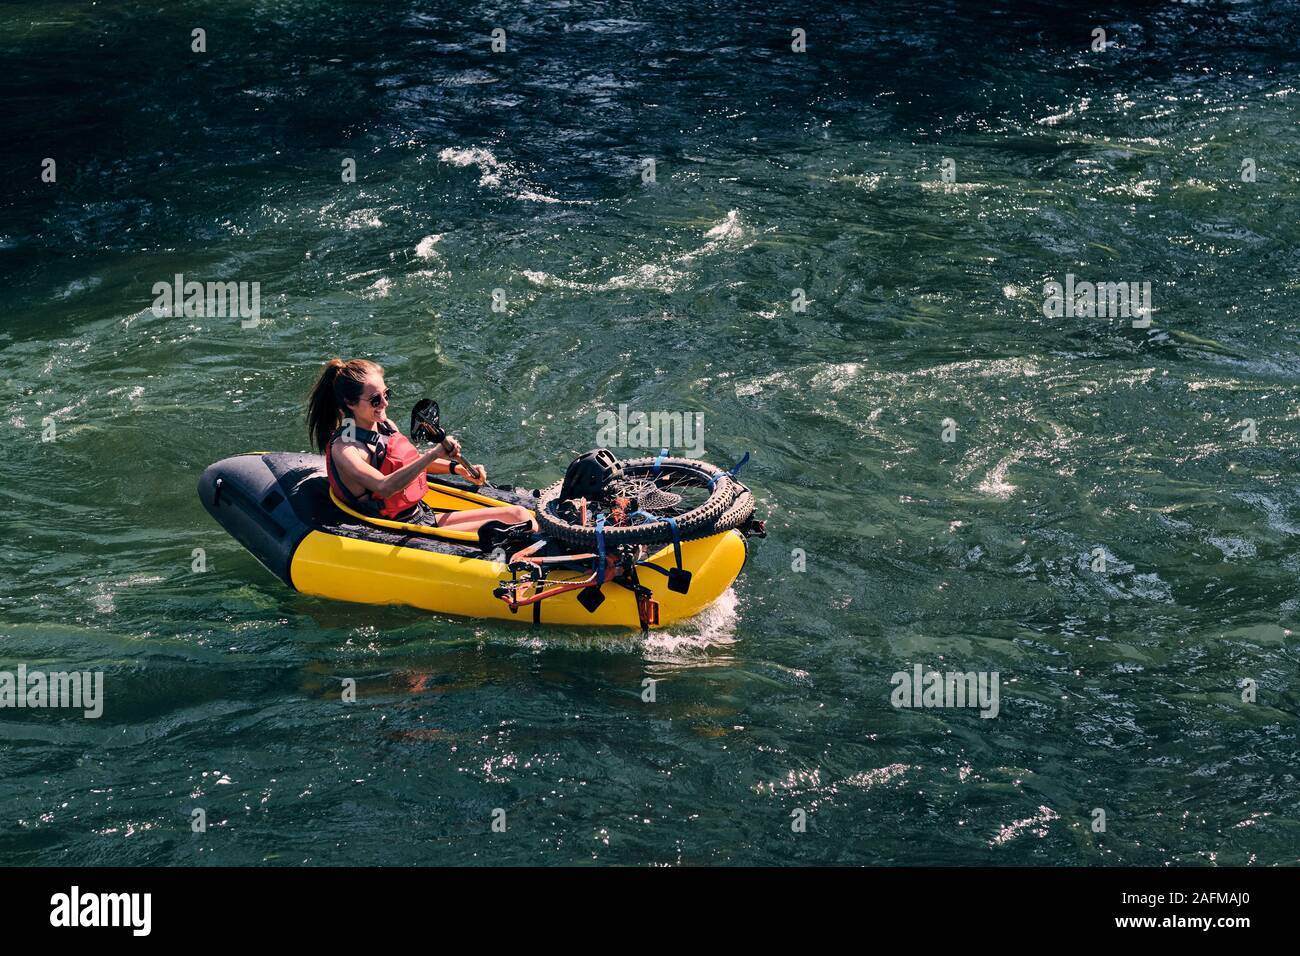 Woman runs rapids on the Deschutes River in a pack raft in Oregon. Stock Photo